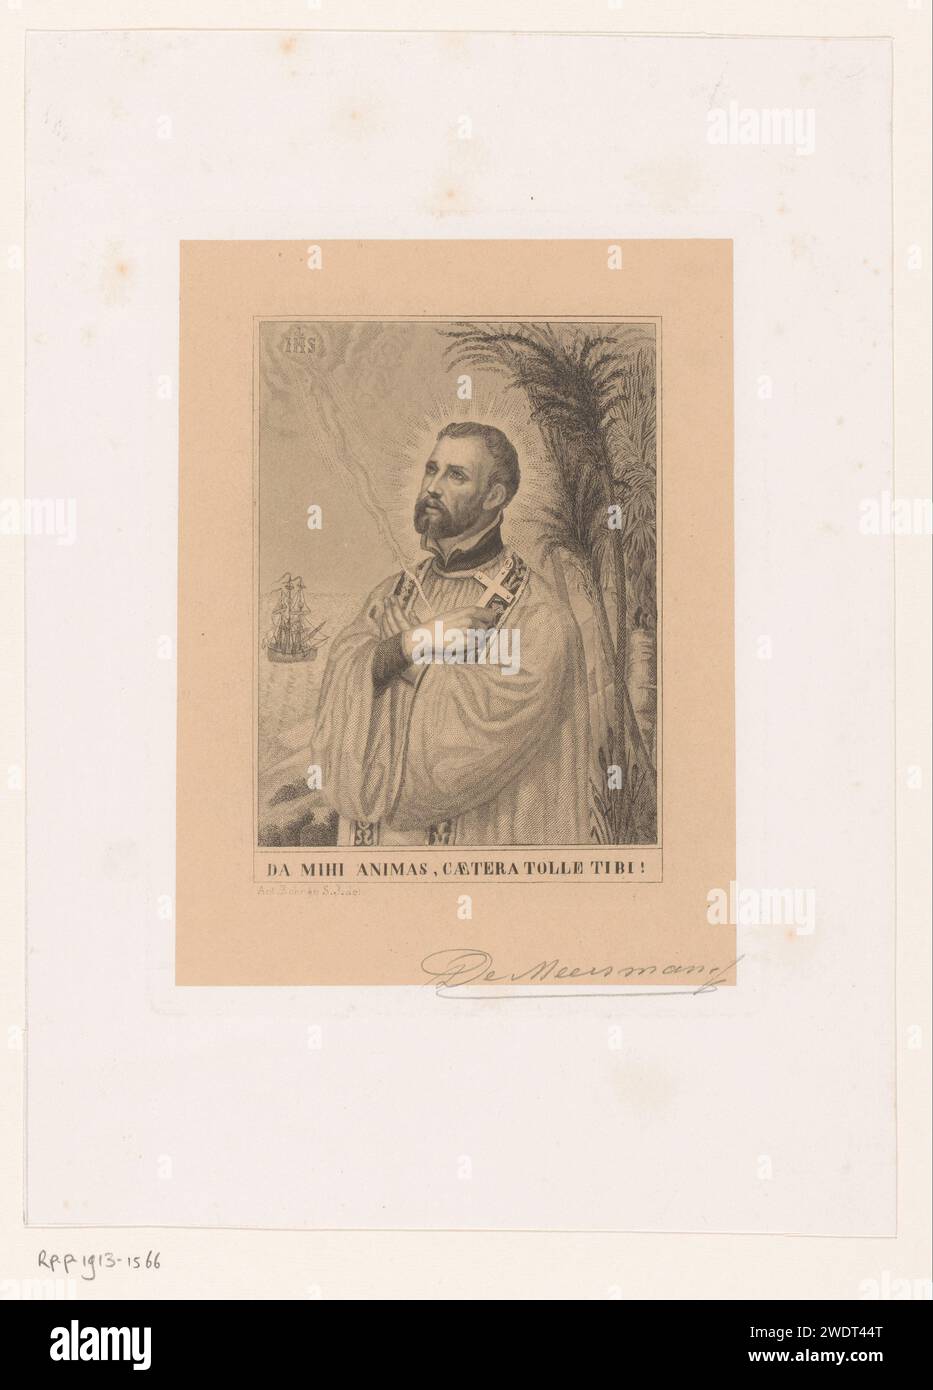 Portrait of Francis Xavier, François de Meersman, After Ant. Bohnen, 1840 - 1905 print   paper. etching the Jesuit missionary Francis Xavier; possible attributes: cross, crucifix, flaming heart, Indian, lily, torch. sailing-ship, sailing-boat. historical persons Stock Photo